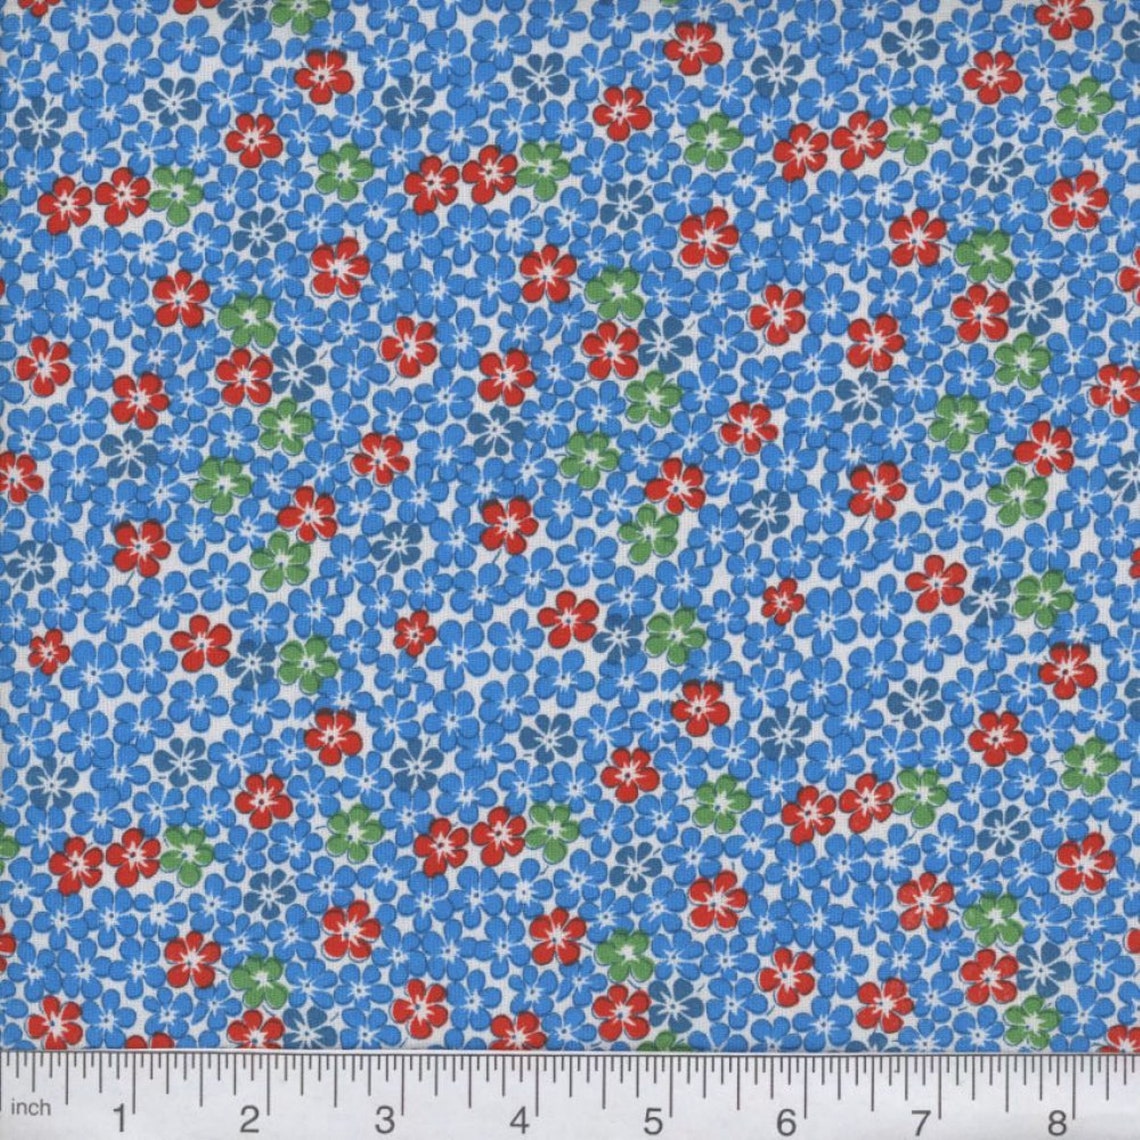 Blue & Red Calico Fabric 100% Cotton Fabric By The Yard | Etsy